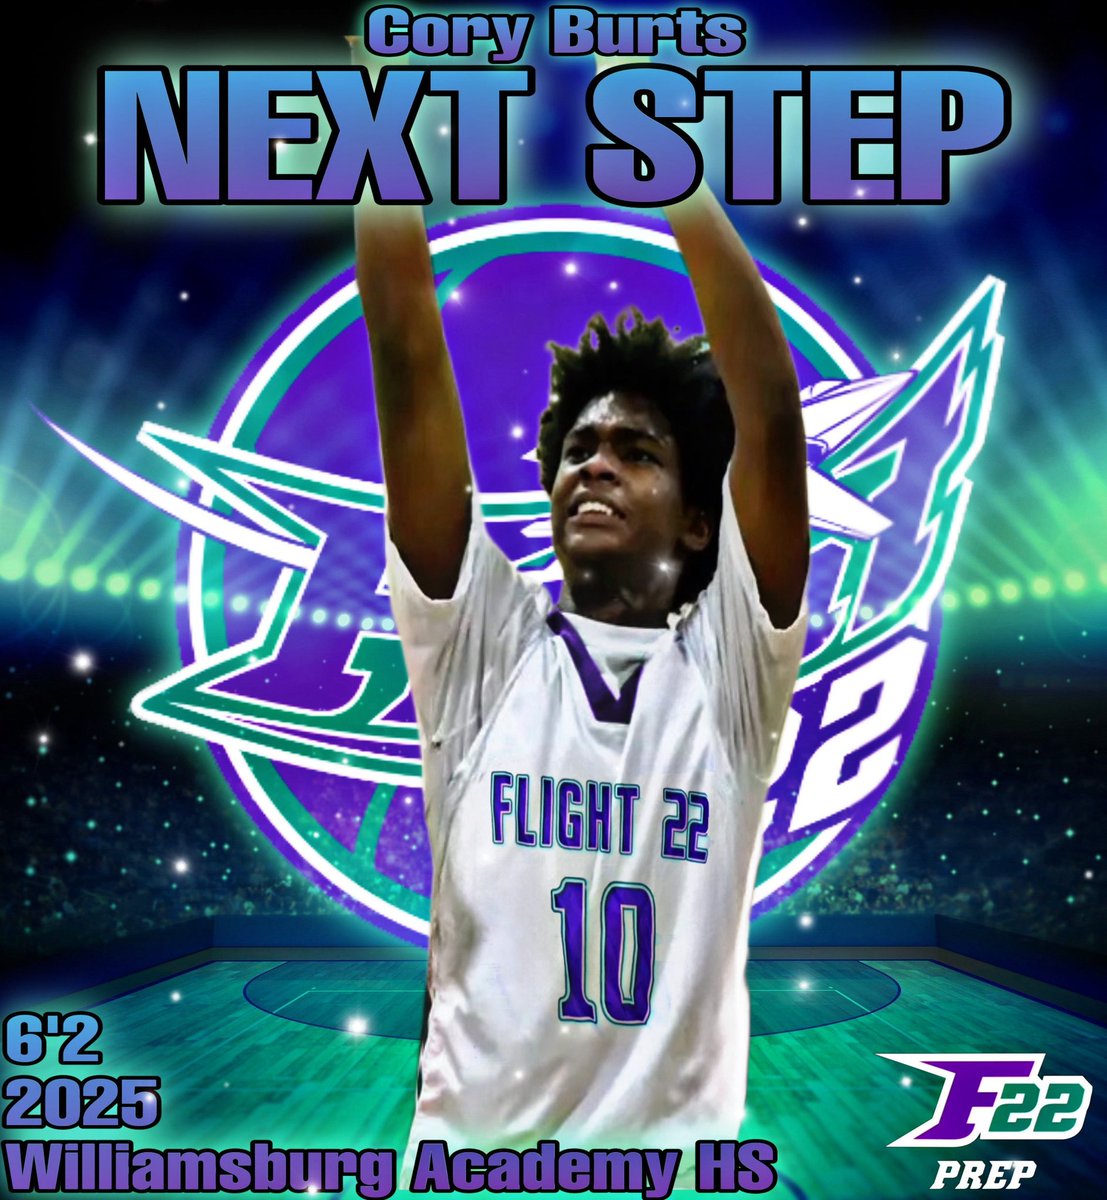 Flight 22 Prep is happy to welcome Cory Burts to our 24'-25' postgraduate roster. Cory will maximize his GAP year & will move to the recruiting class of 25'. Let's get to work! #f22brotherhood #f22culture